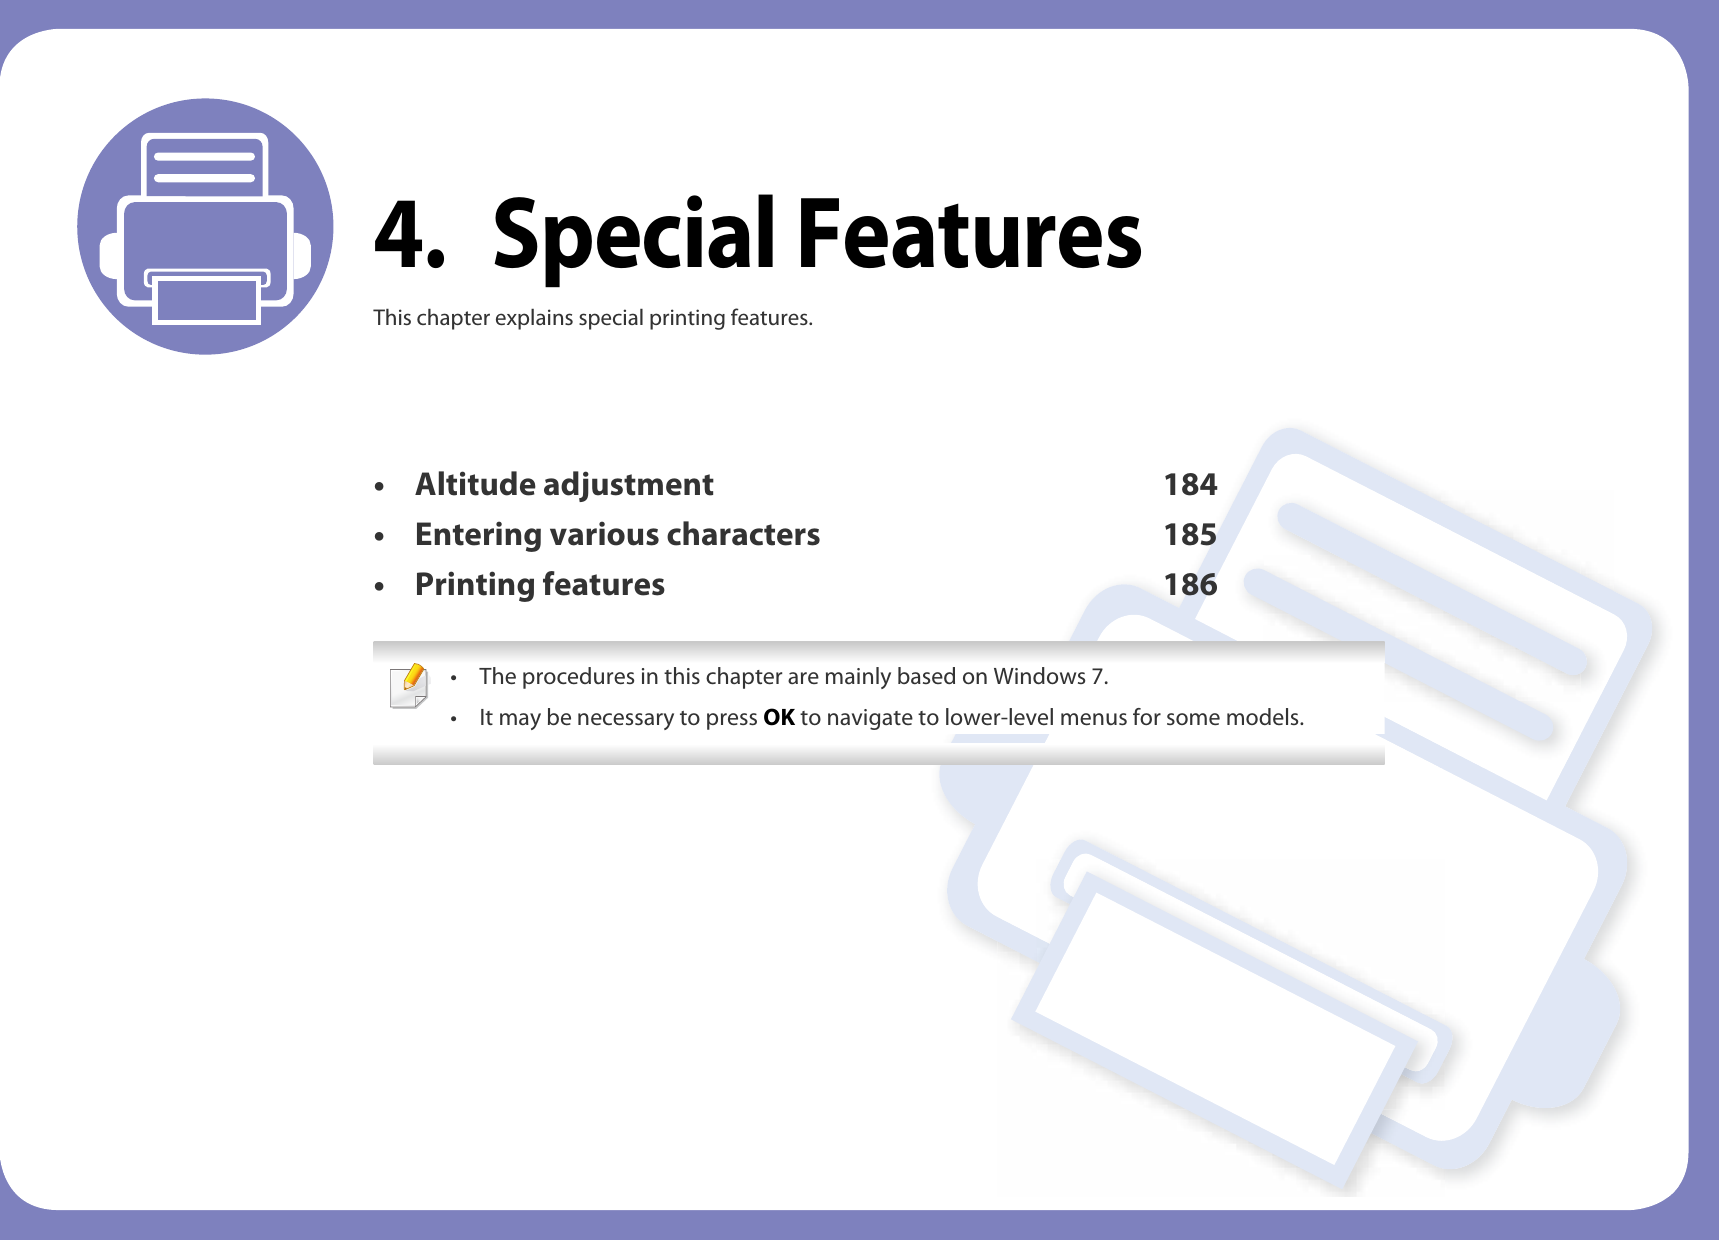 4. Special FeaturesThis chapter explains special printing features.• Altitude adjustment 184• Entering various characters 185• Printing features 186 • The procedures in this chapter are mainly based on Windows 7.• It may be necessary to press OK to navigate to lower-level menus for some models. 